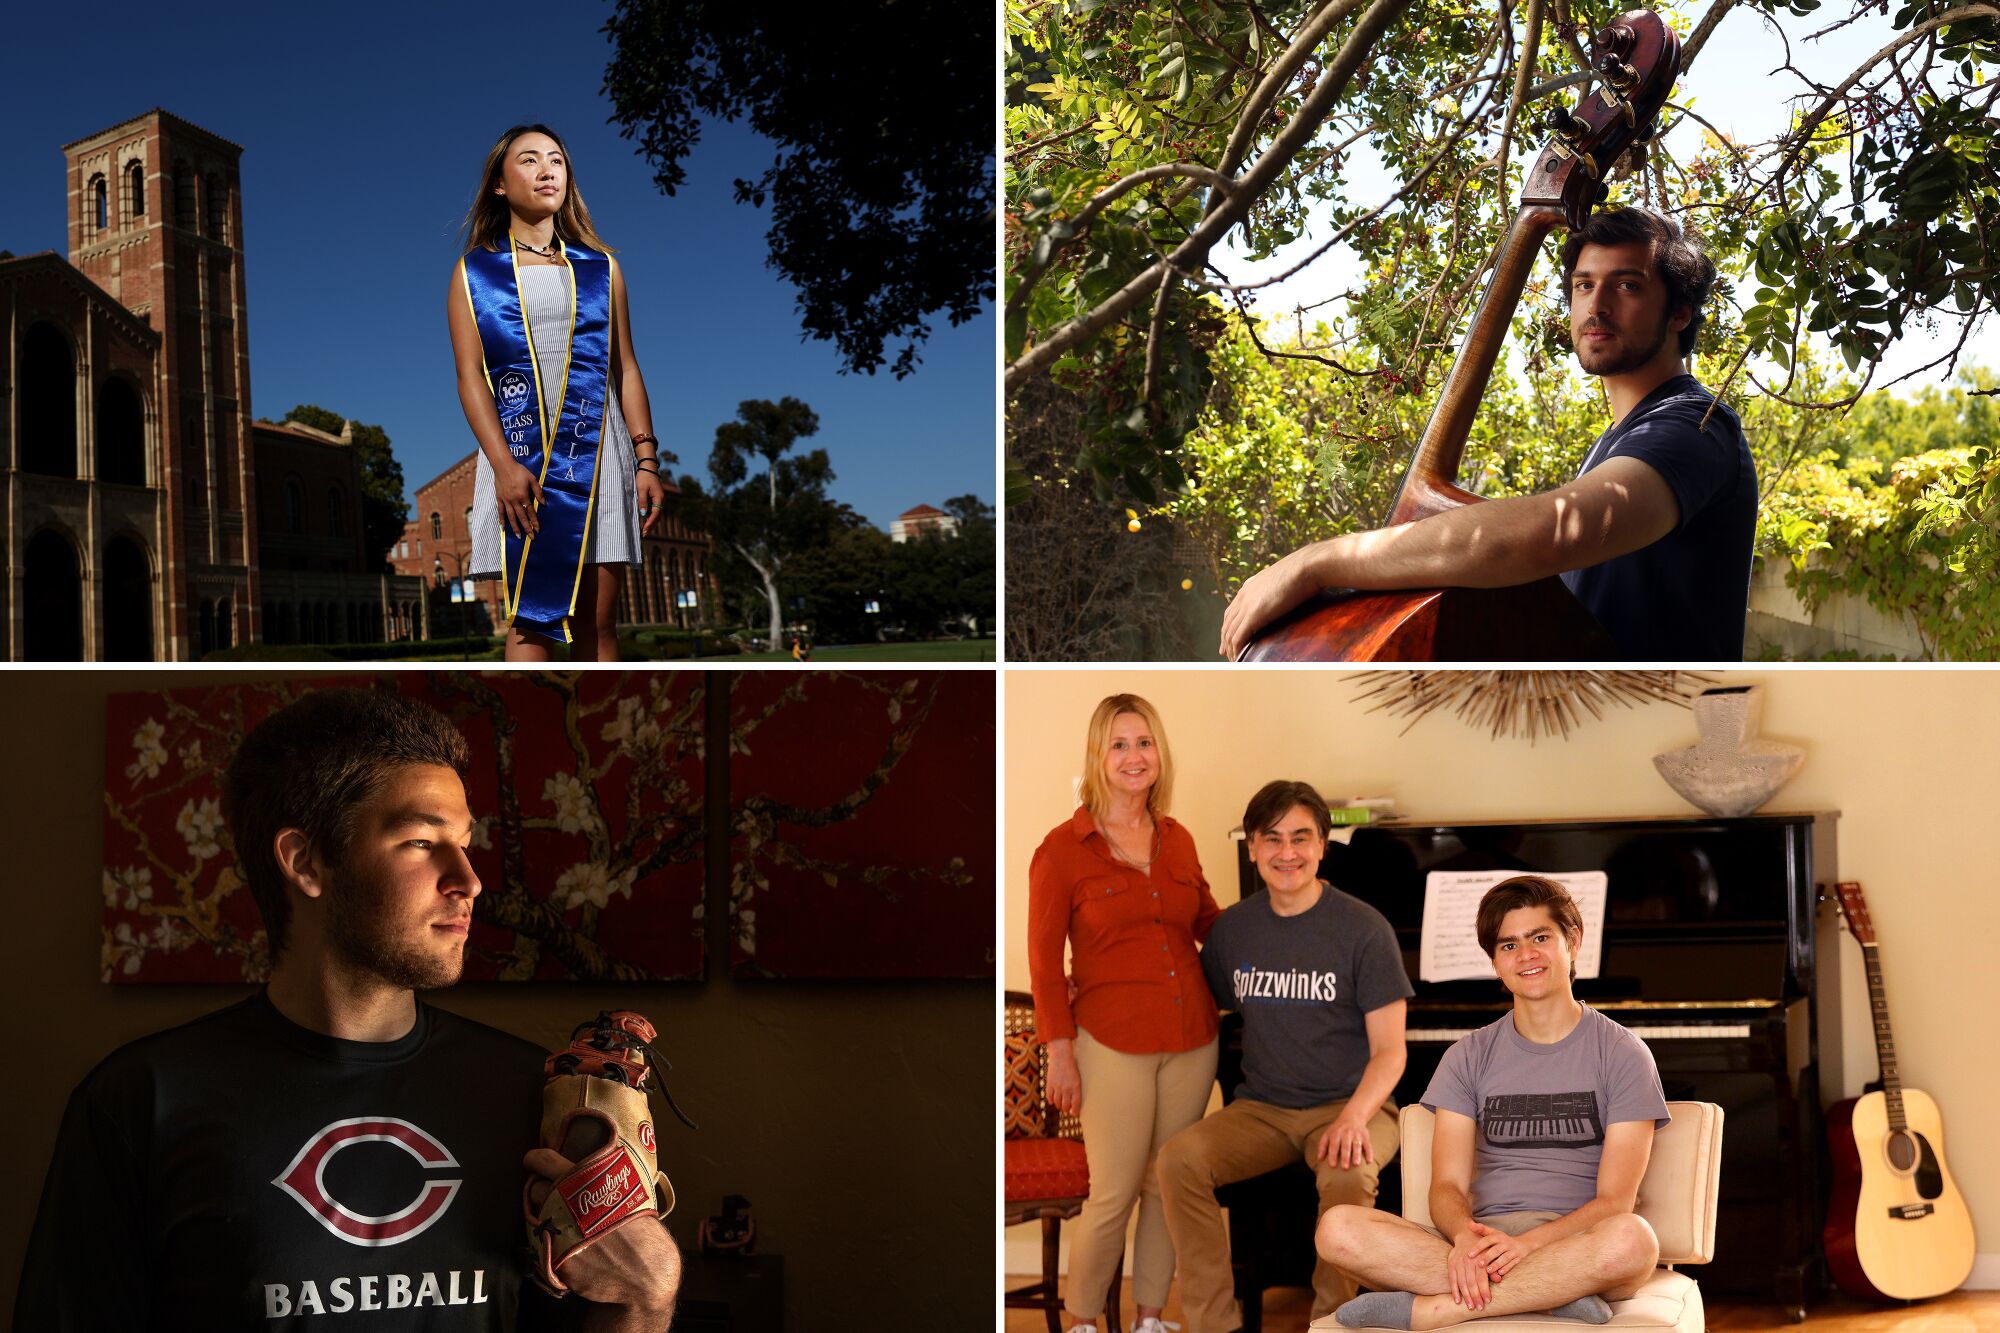 Clockwise from top left: Christine Tran, a UCLA senior majoring in international development and Asian studies; Weston Kerekes, a senior at Santa Monica High School; Dylan Schifrin, a senior at Yale majoring in music, with his parents, Lissa Kapstrom and Will Schifrin; and Alec Garcia, a senior at Cleveland Charter High School in Reseda.